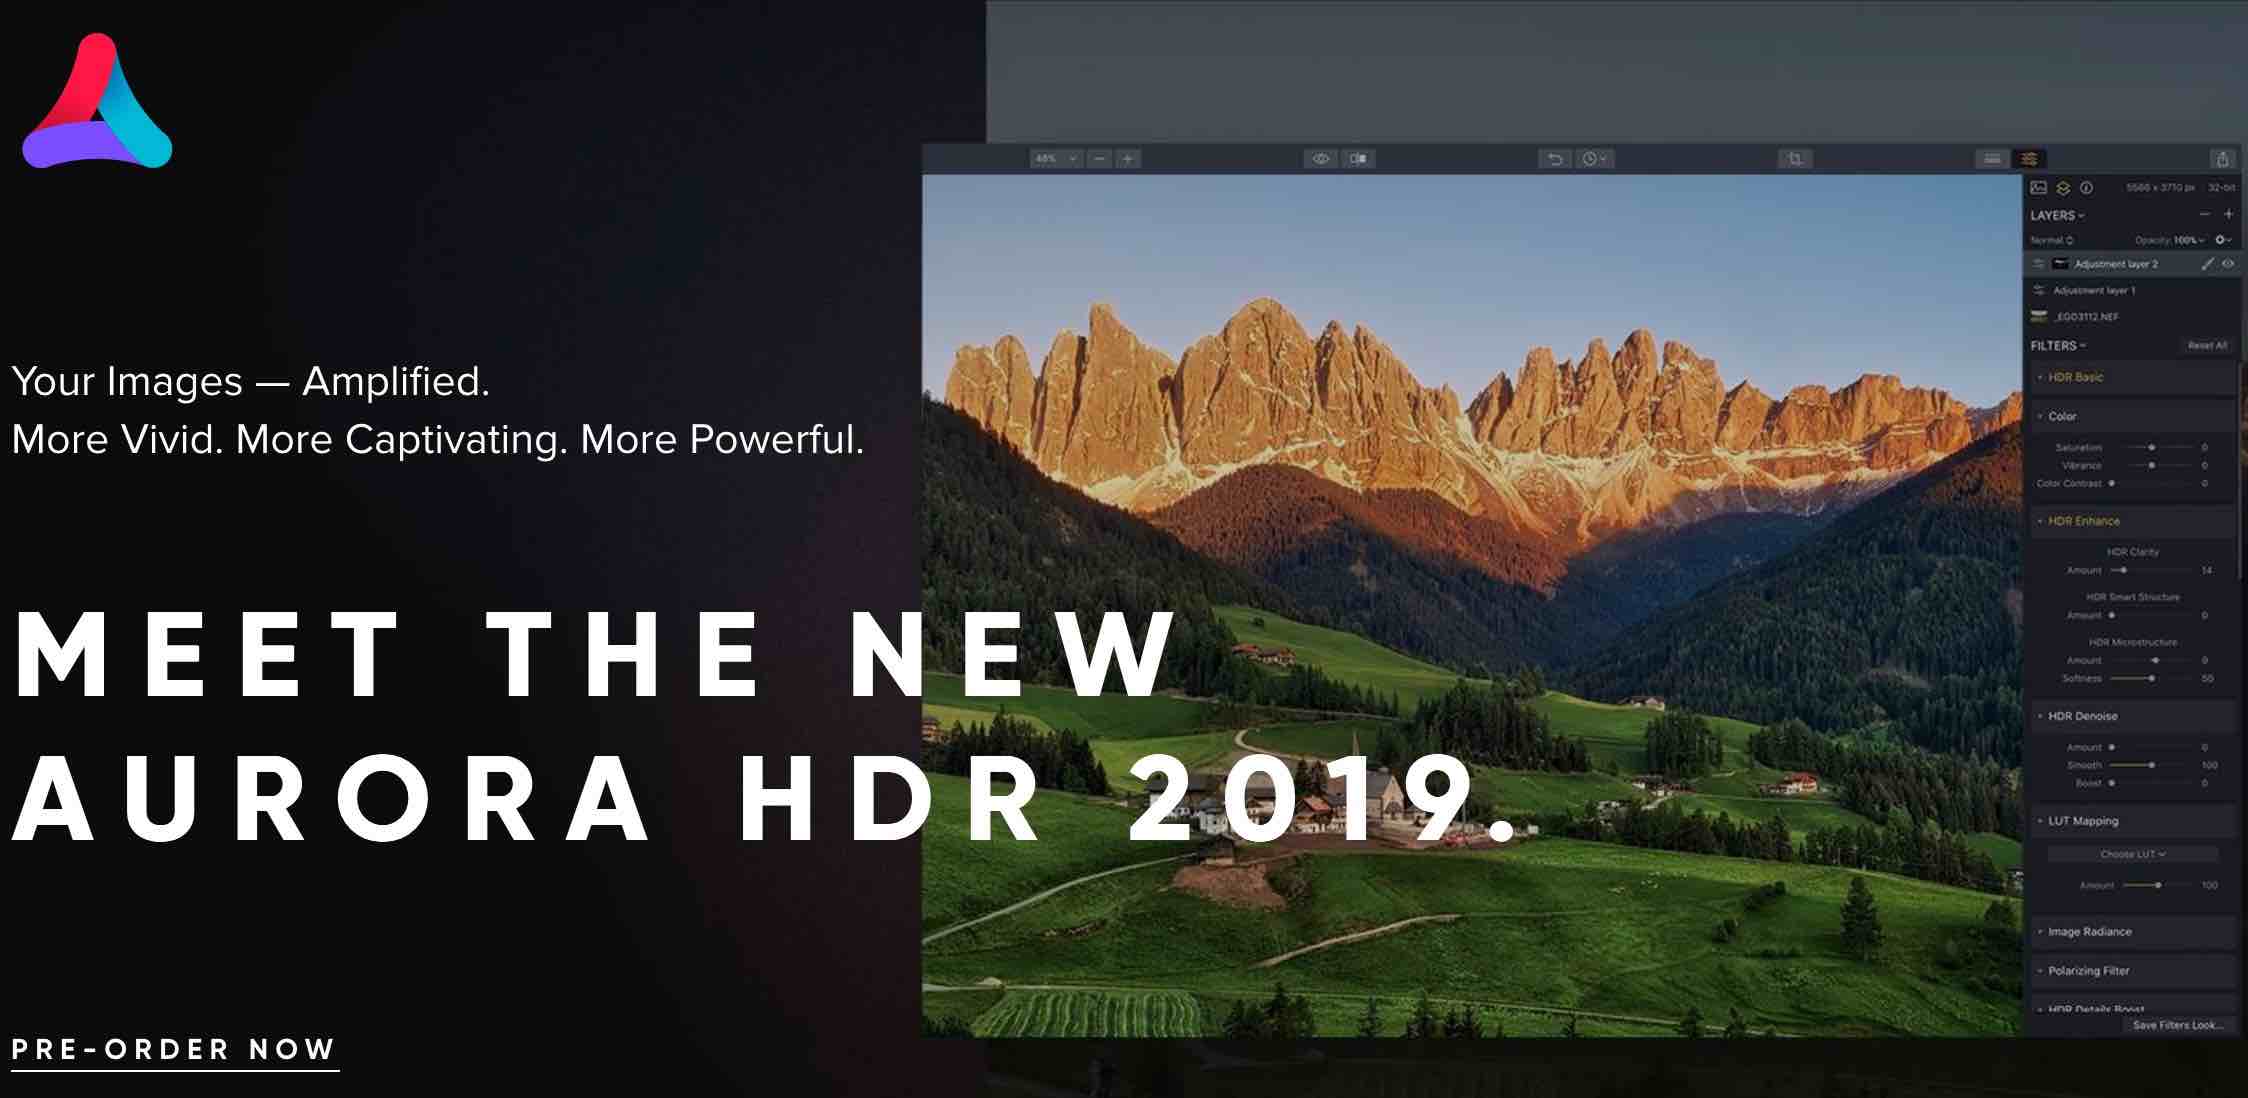 aurora hdr 2019 photography and hdr imaging software